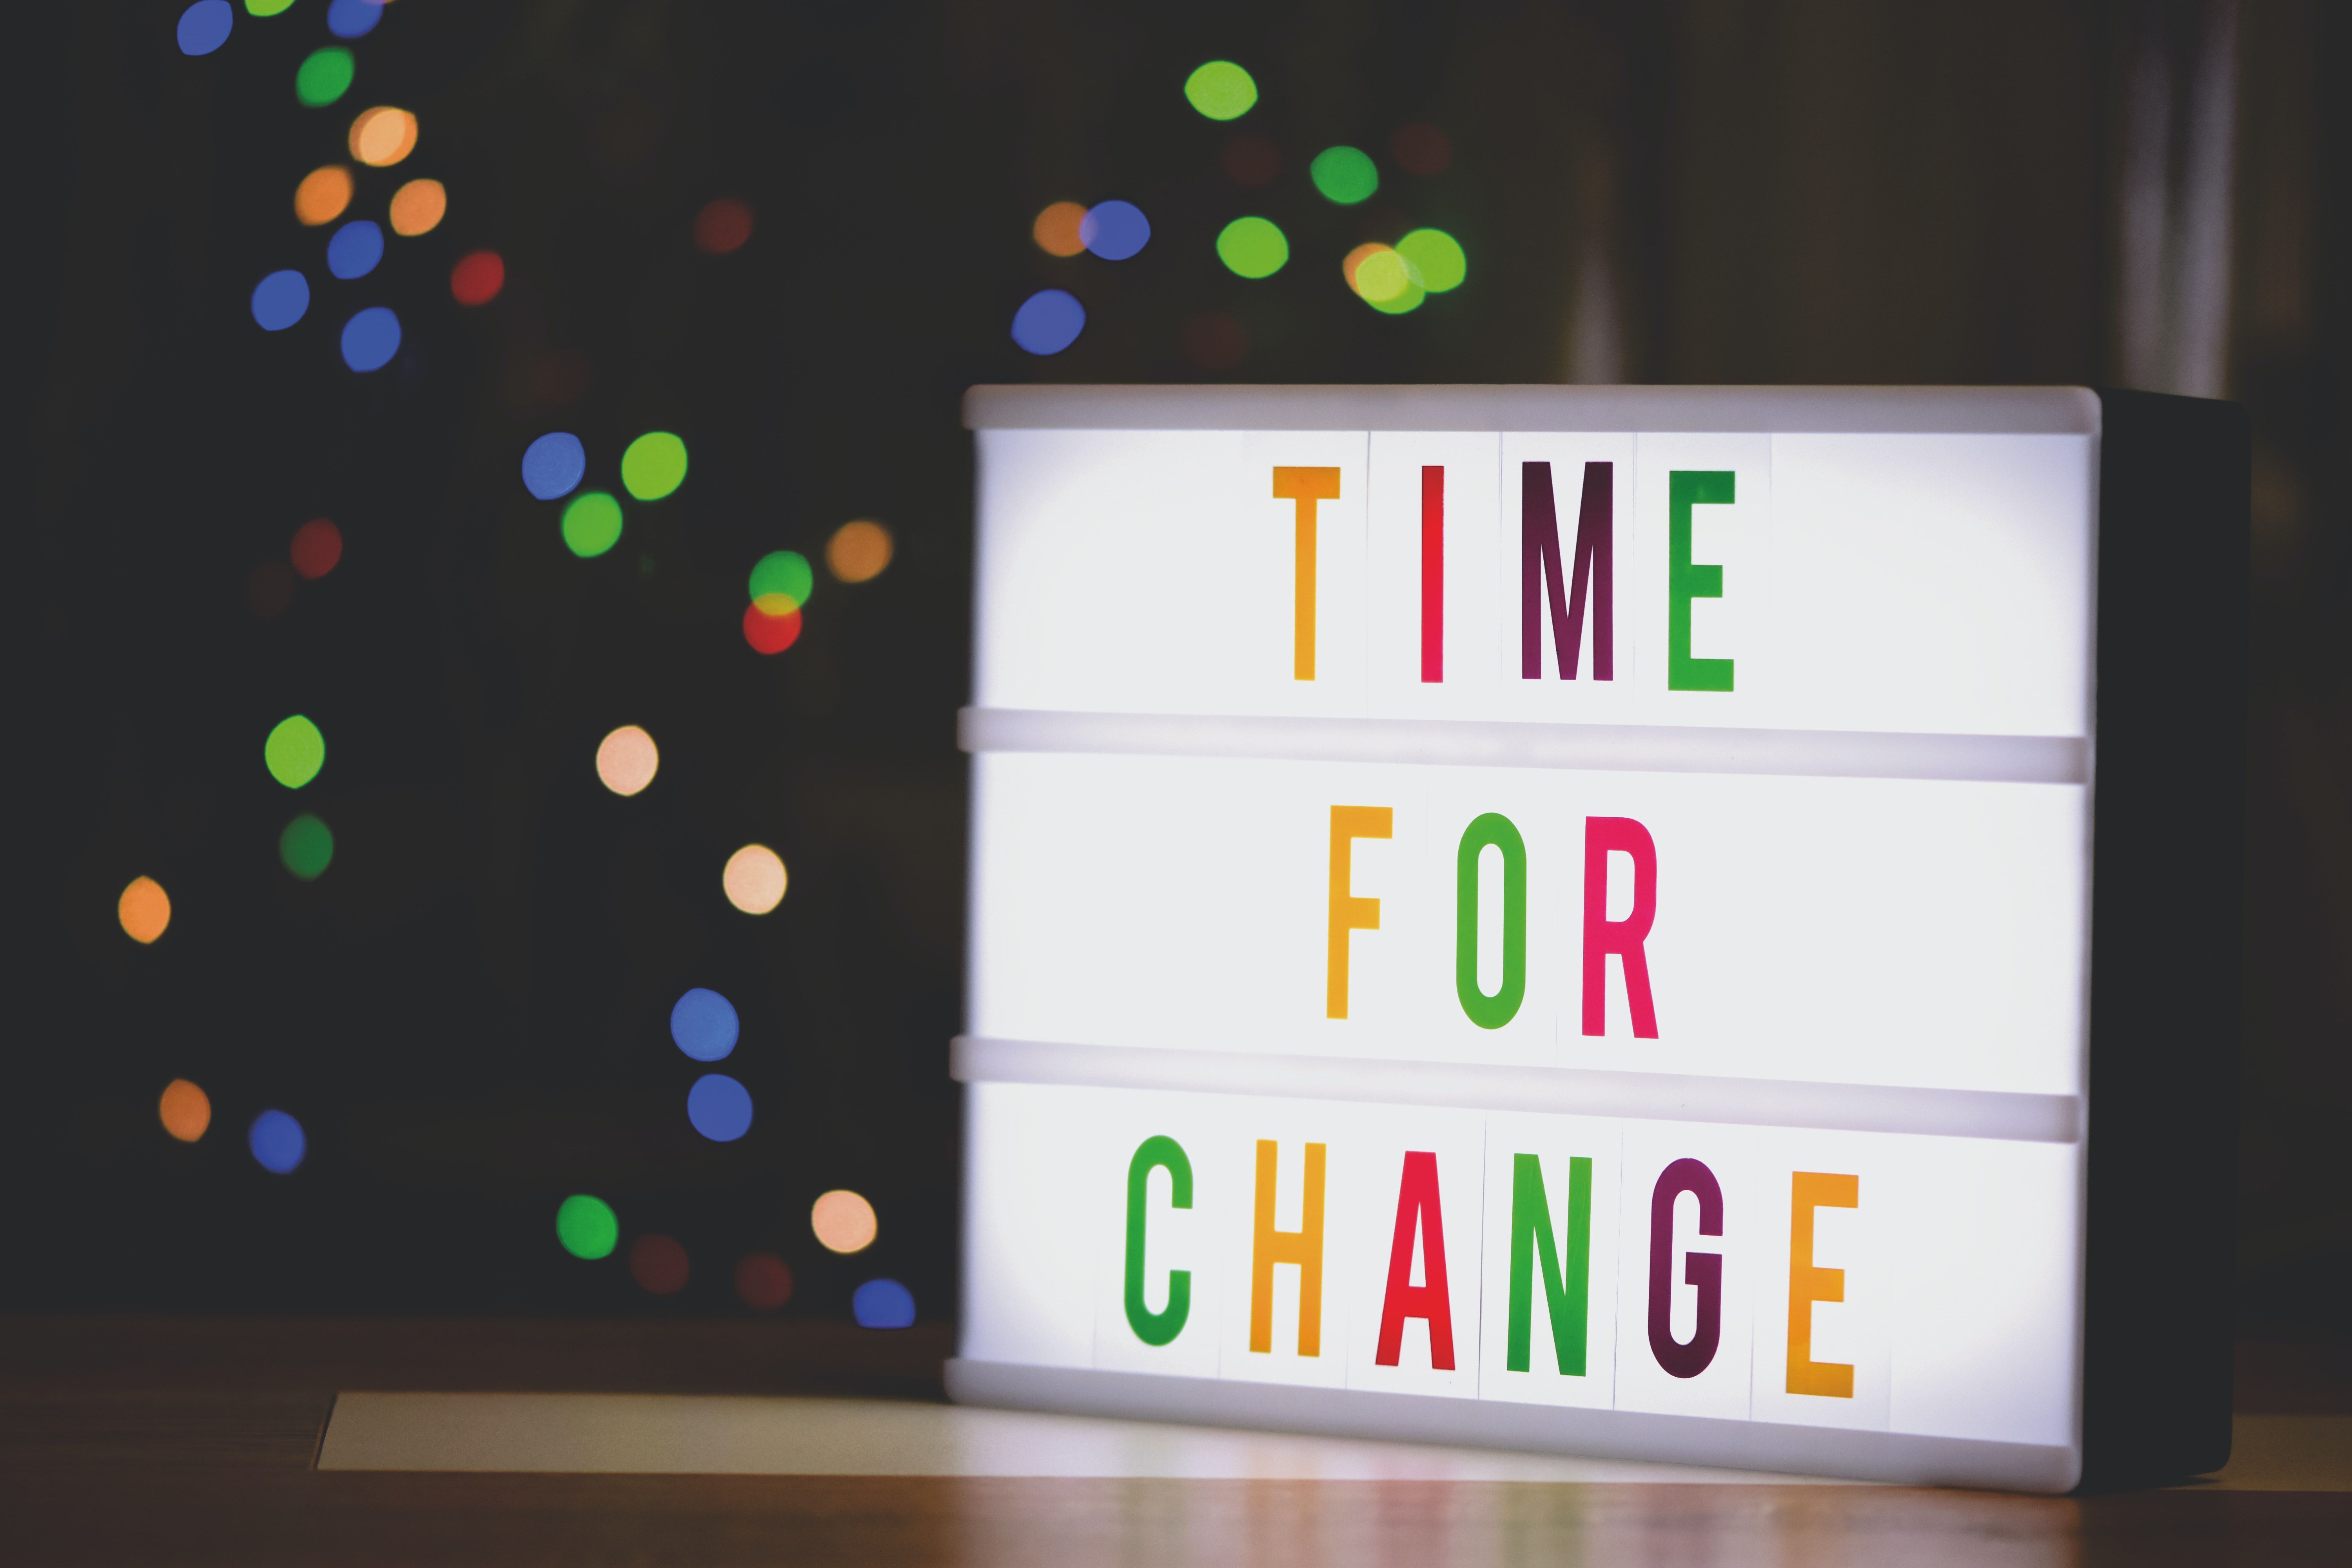 time-for-change-sign-with-led-light-2277784.jpg